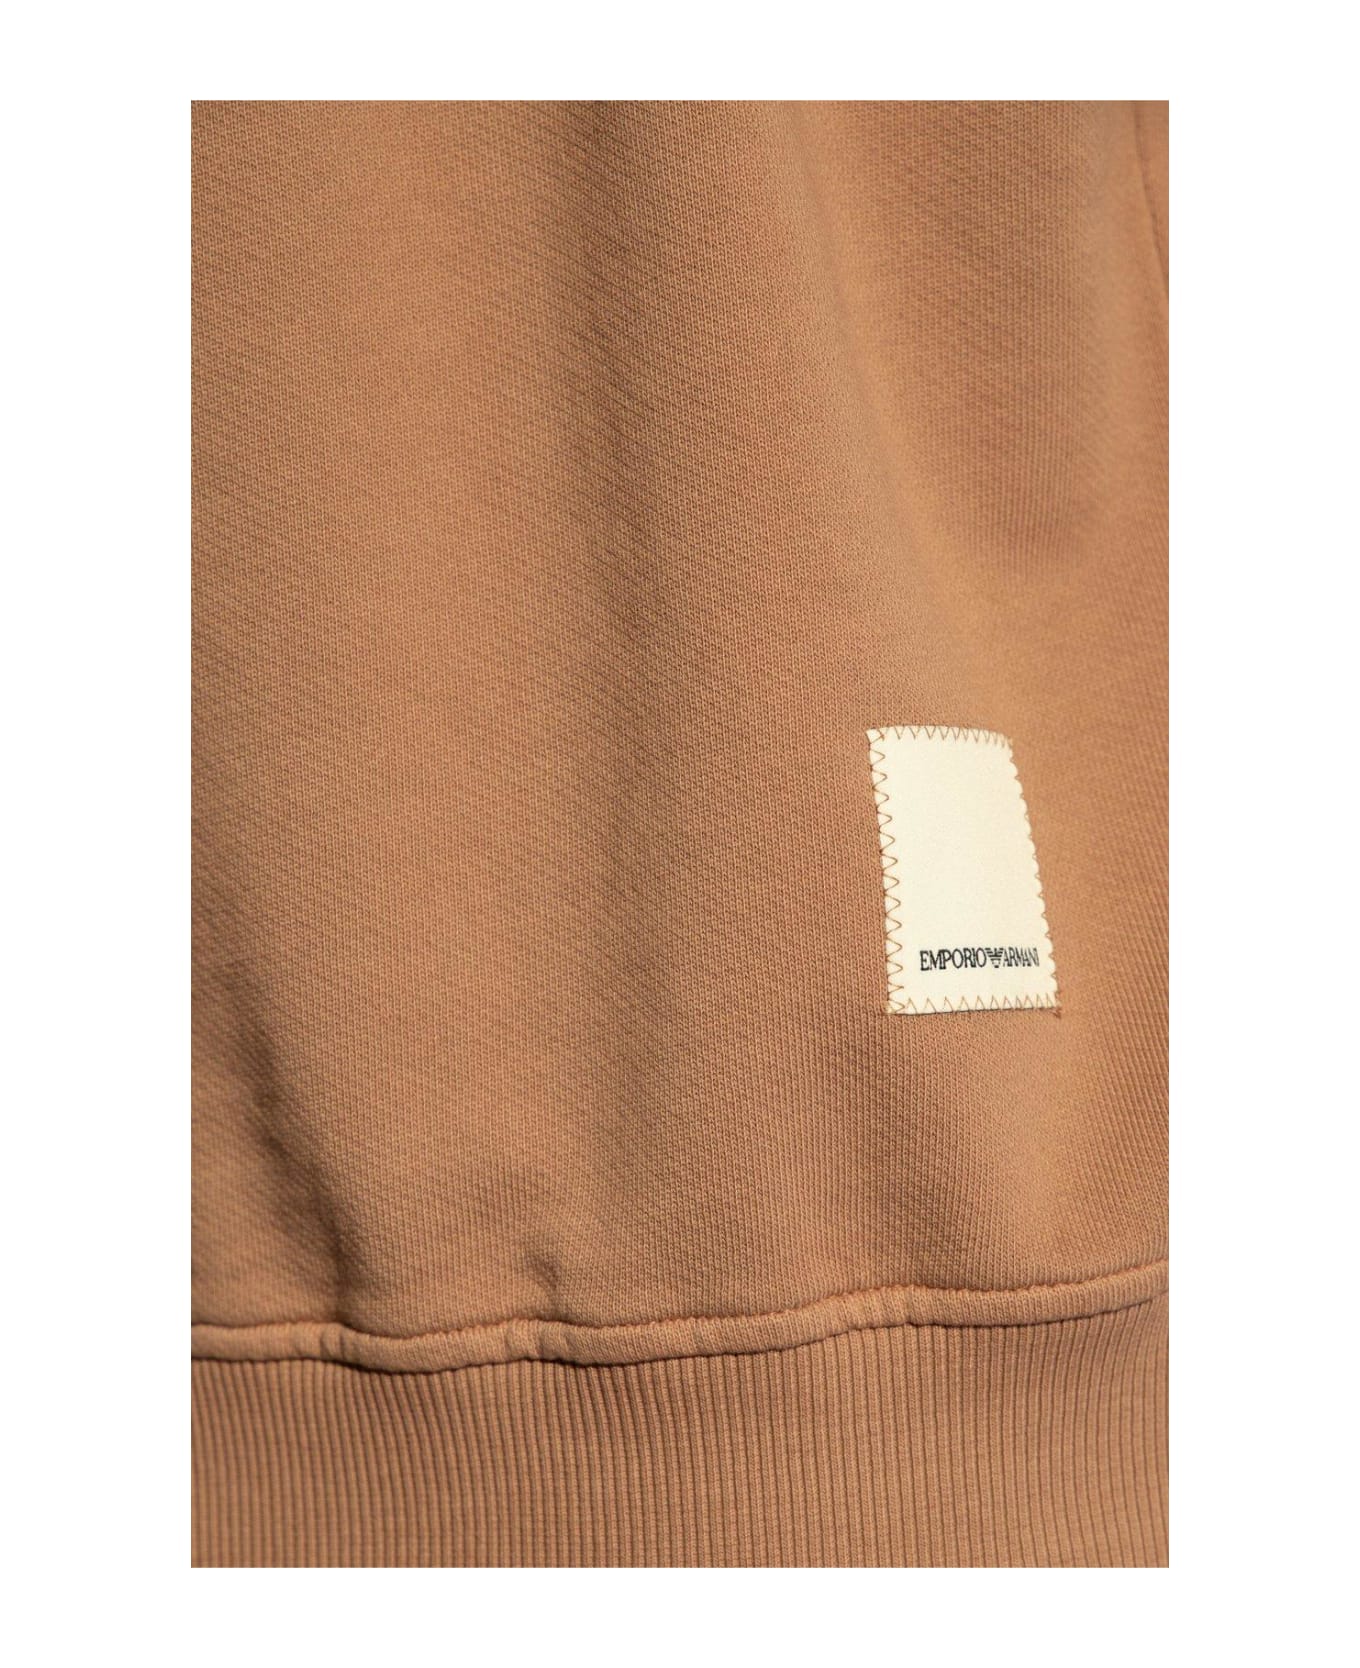 Emporio Armani Sustainable Collection Hoodie - BROWN フリース